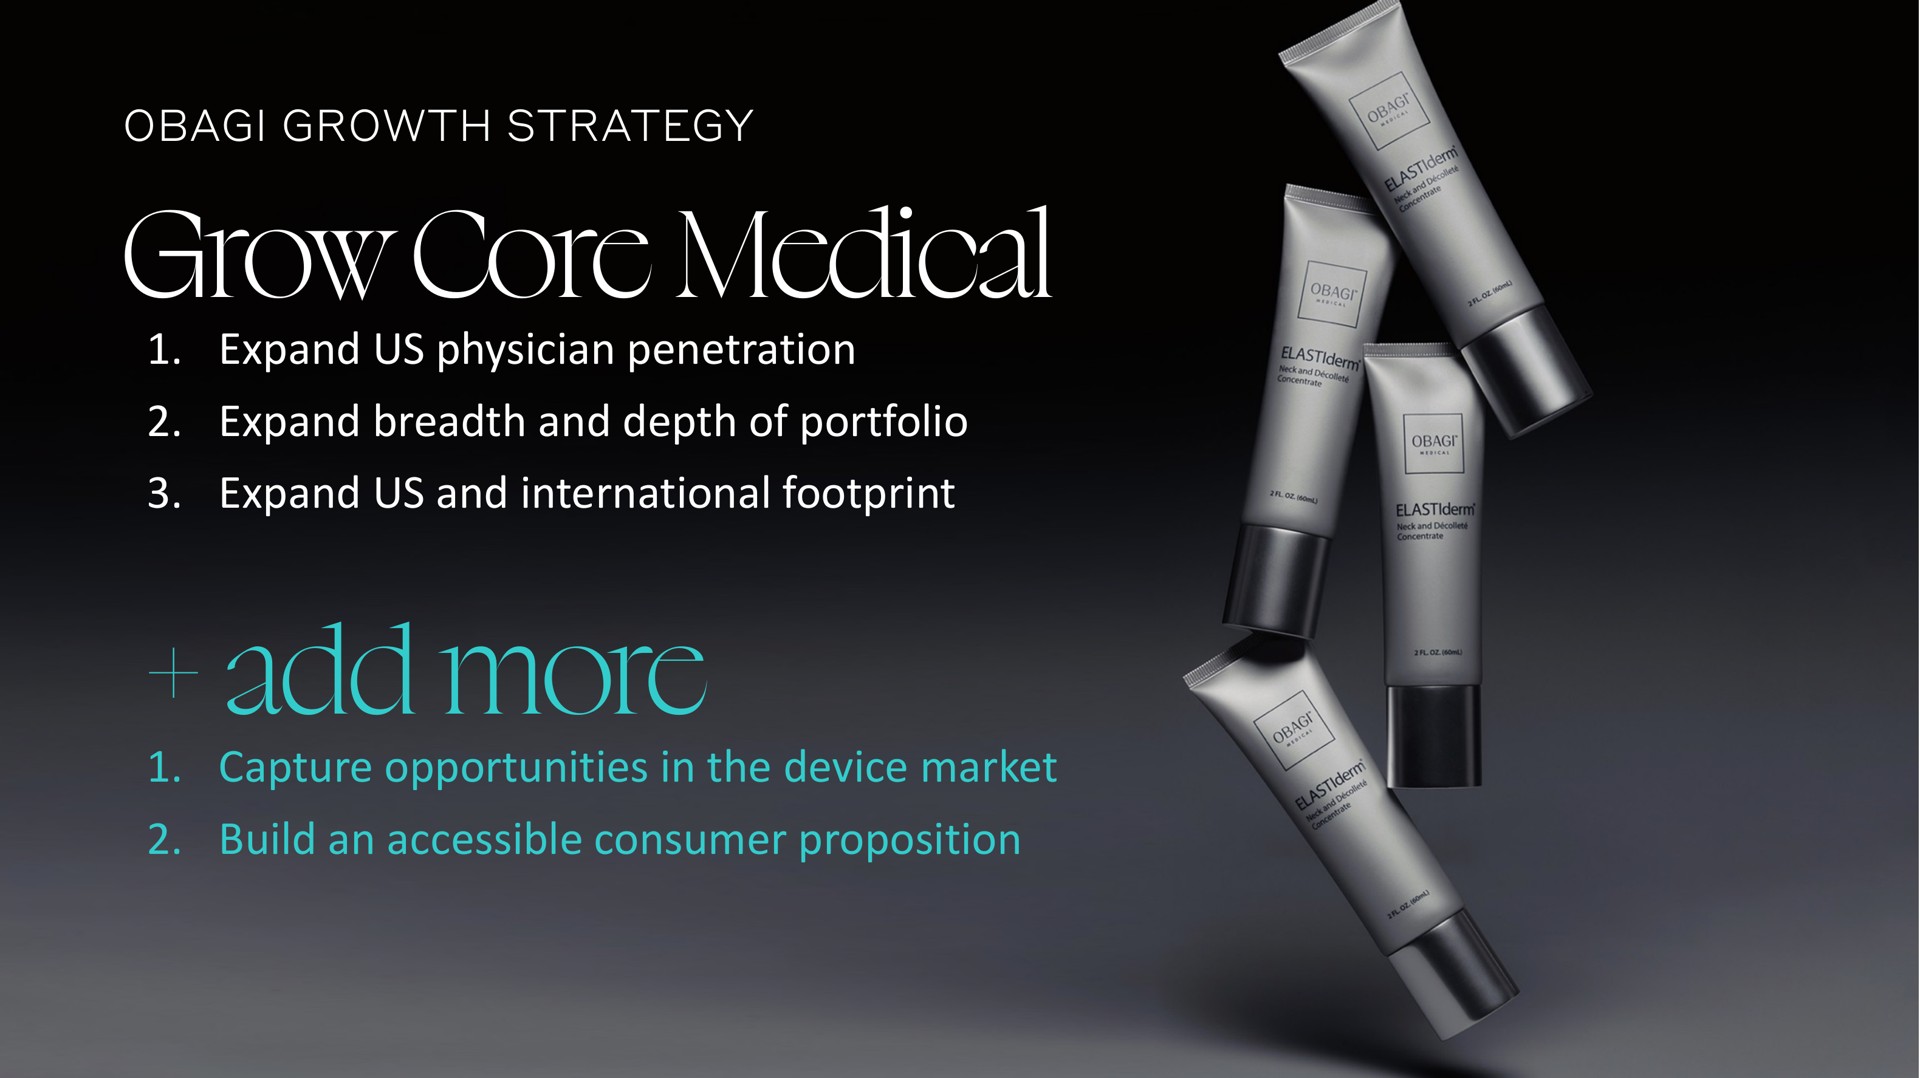 grow core medical expand us physician penetration expand breadth and depth of portfolio expand us and international footprint add more capture opportunities in the device market build an accessible consumer proposition growth strategy | Waldencast